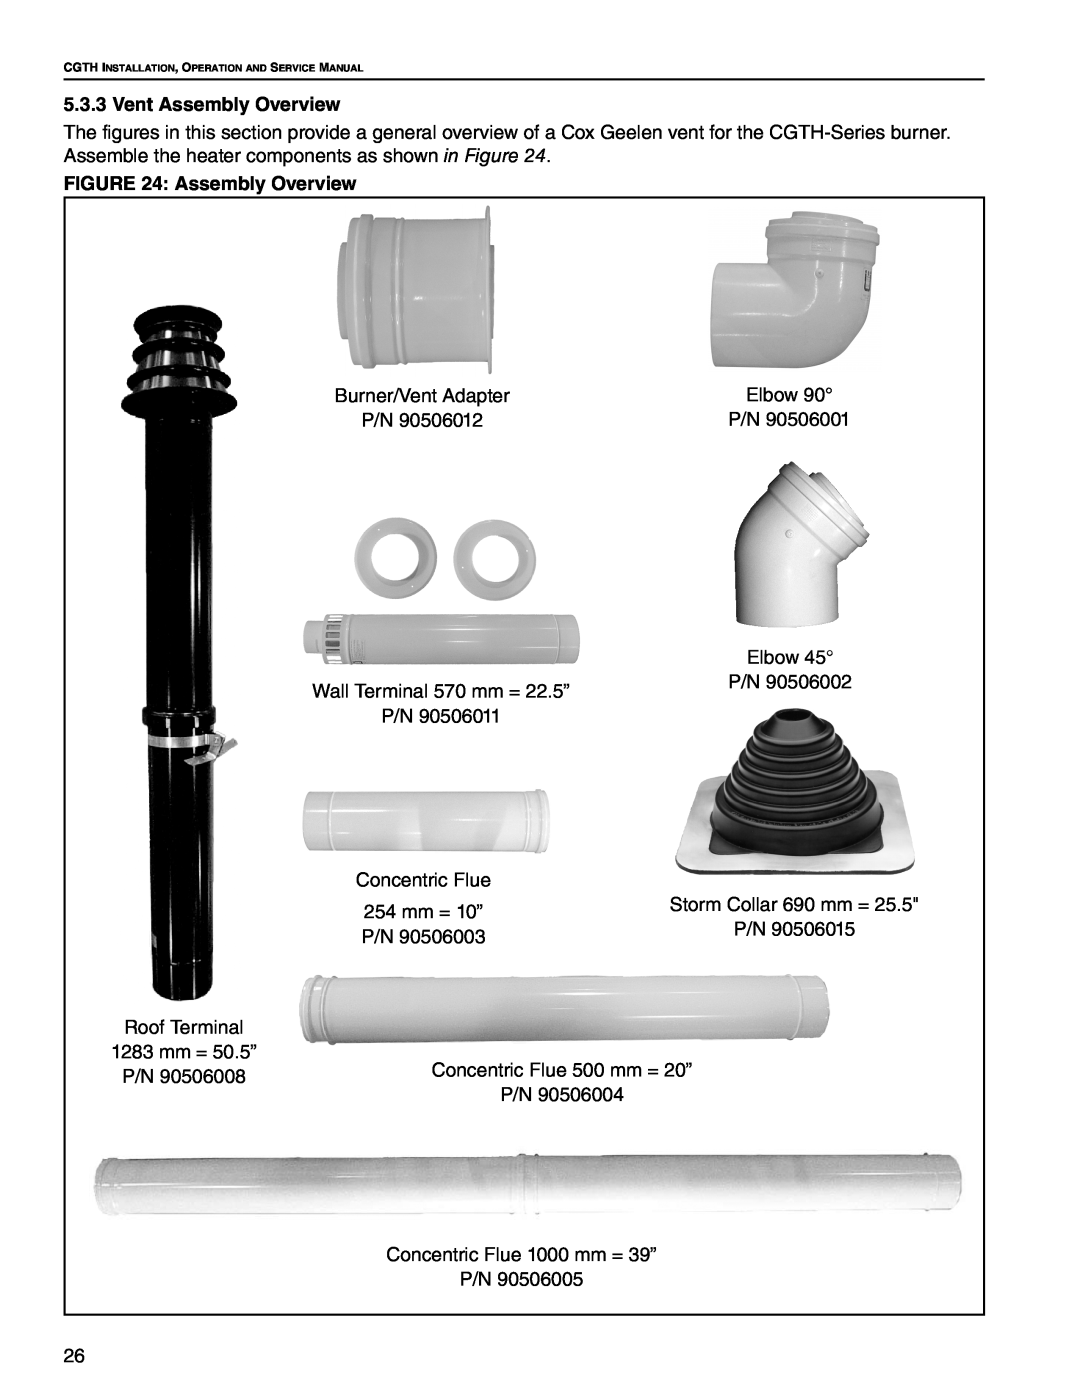 Roberts Gorden CGTH-40, CGTH-30, CGTH-50 service manual Vent Assembly Overview 